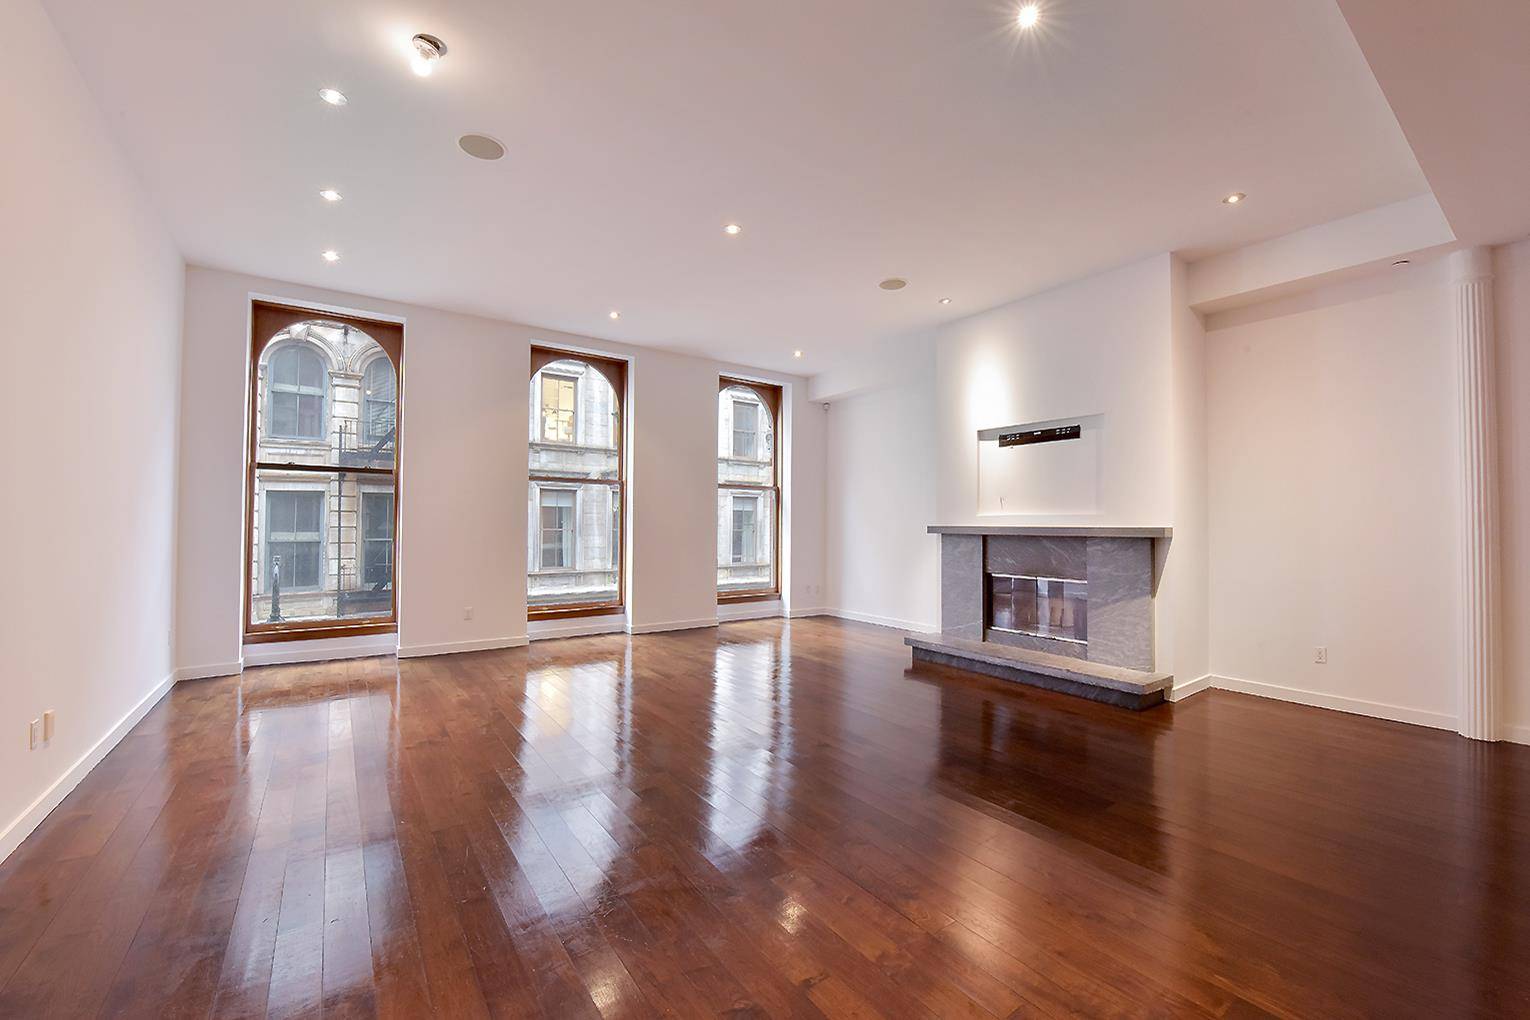 Wonderful views of the historic cast iron lofts lining the cobblestone streets below, residence 2C at 22 Mercer Street is a sprawling condo loft home of nearly 2, 400 SF ...